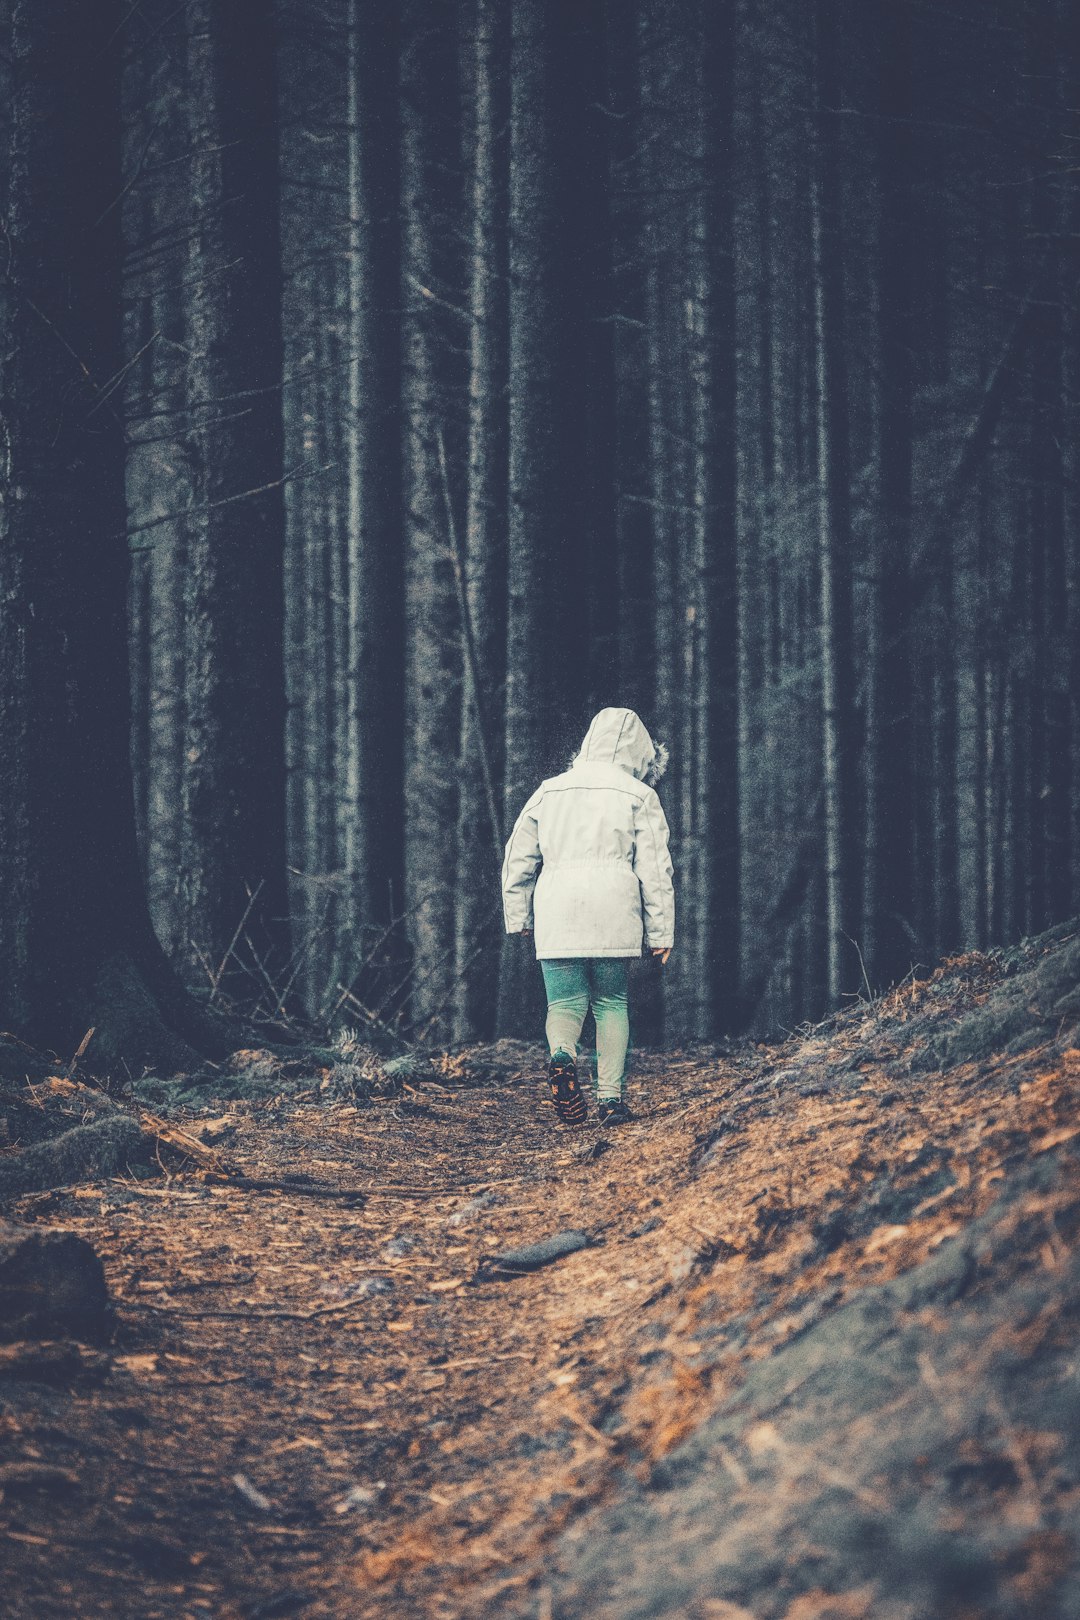 person in white jacket standing on brown dried leaves in forest during daytime